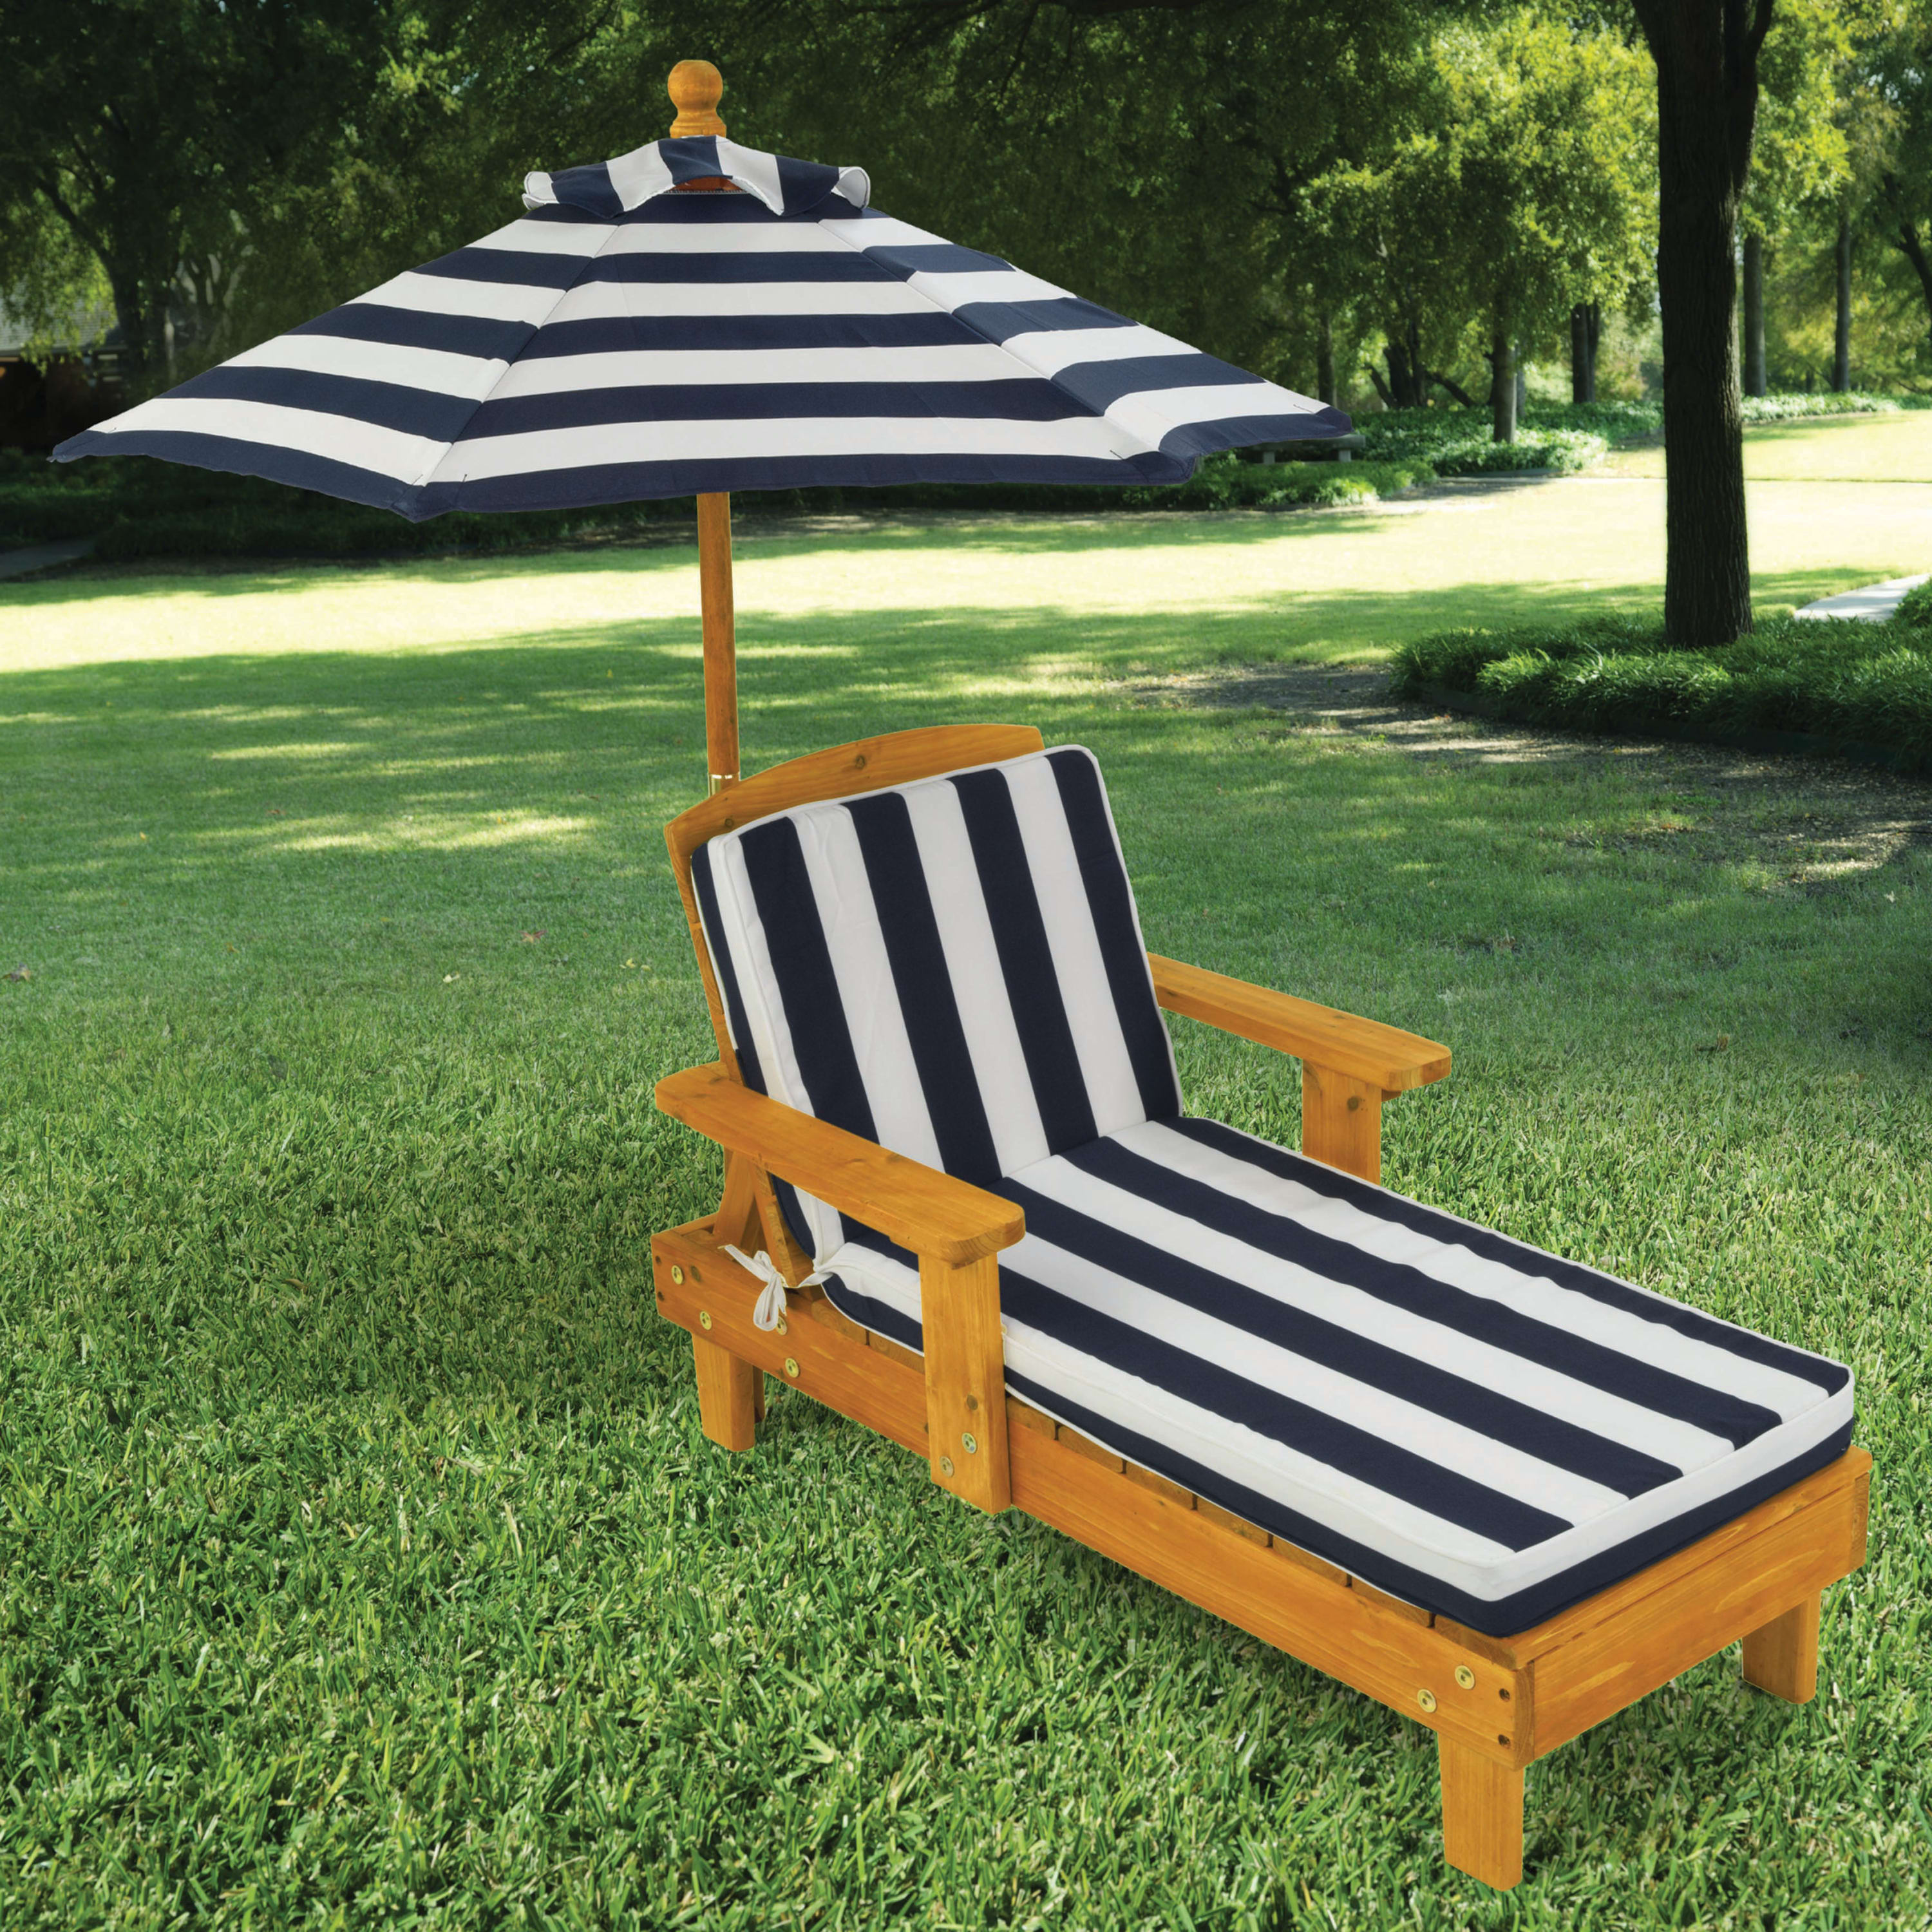 KidKraft Outdoor Wood Chaise Kid's Chair with Umbrella and Cushion - image 2 of 11